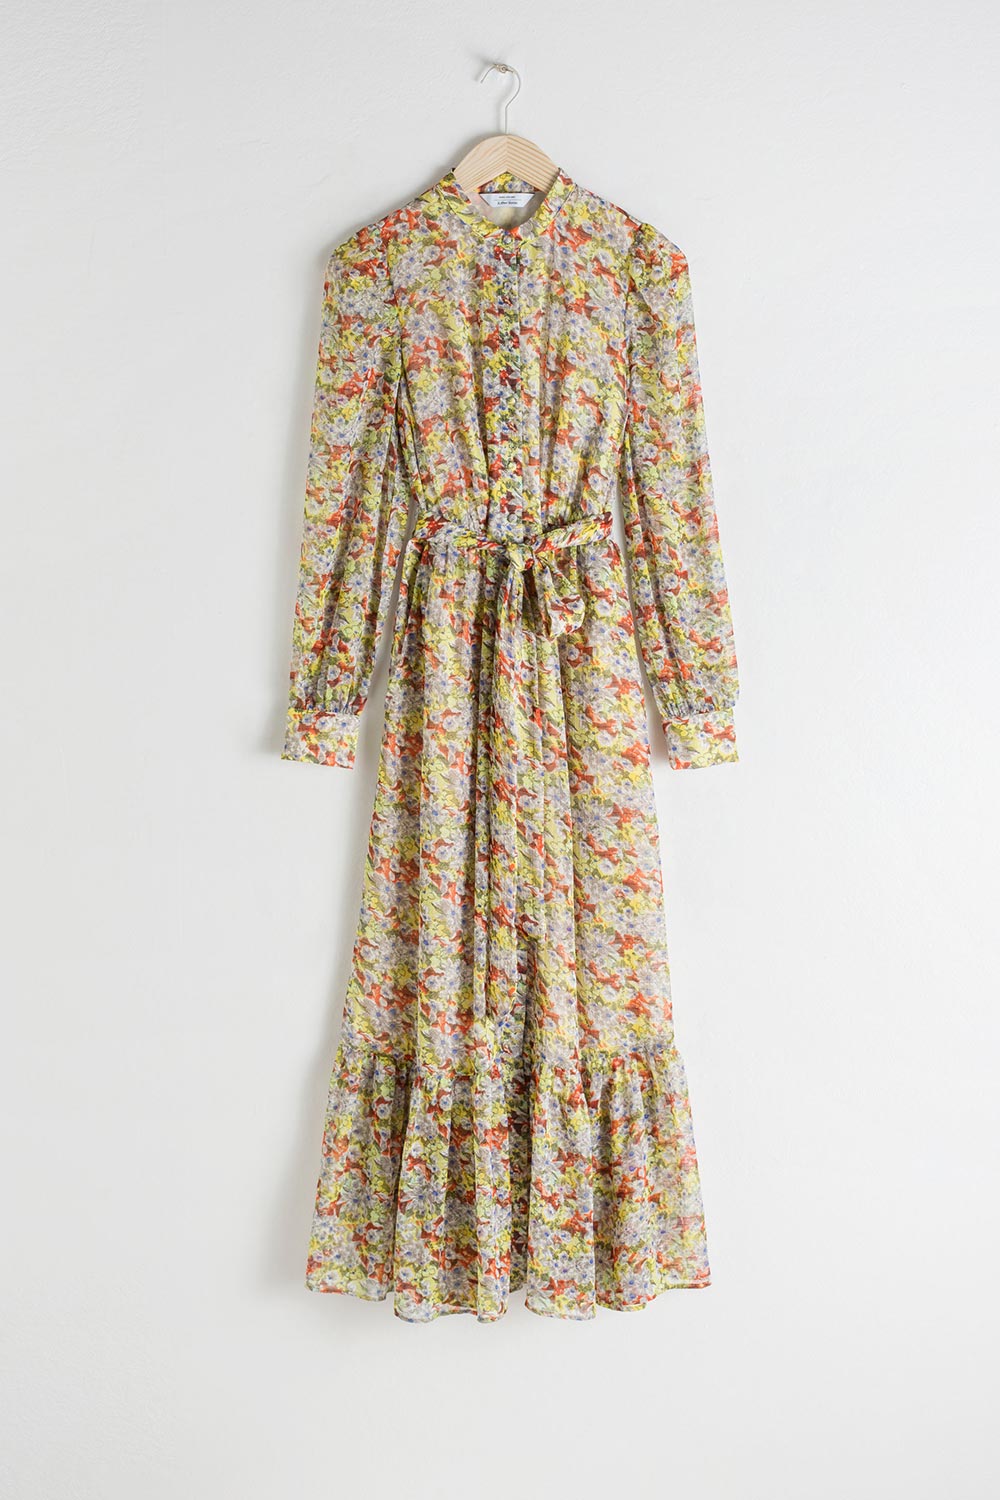 Duchess Kate's £80 & Other Stories floral dress is back in stock ...